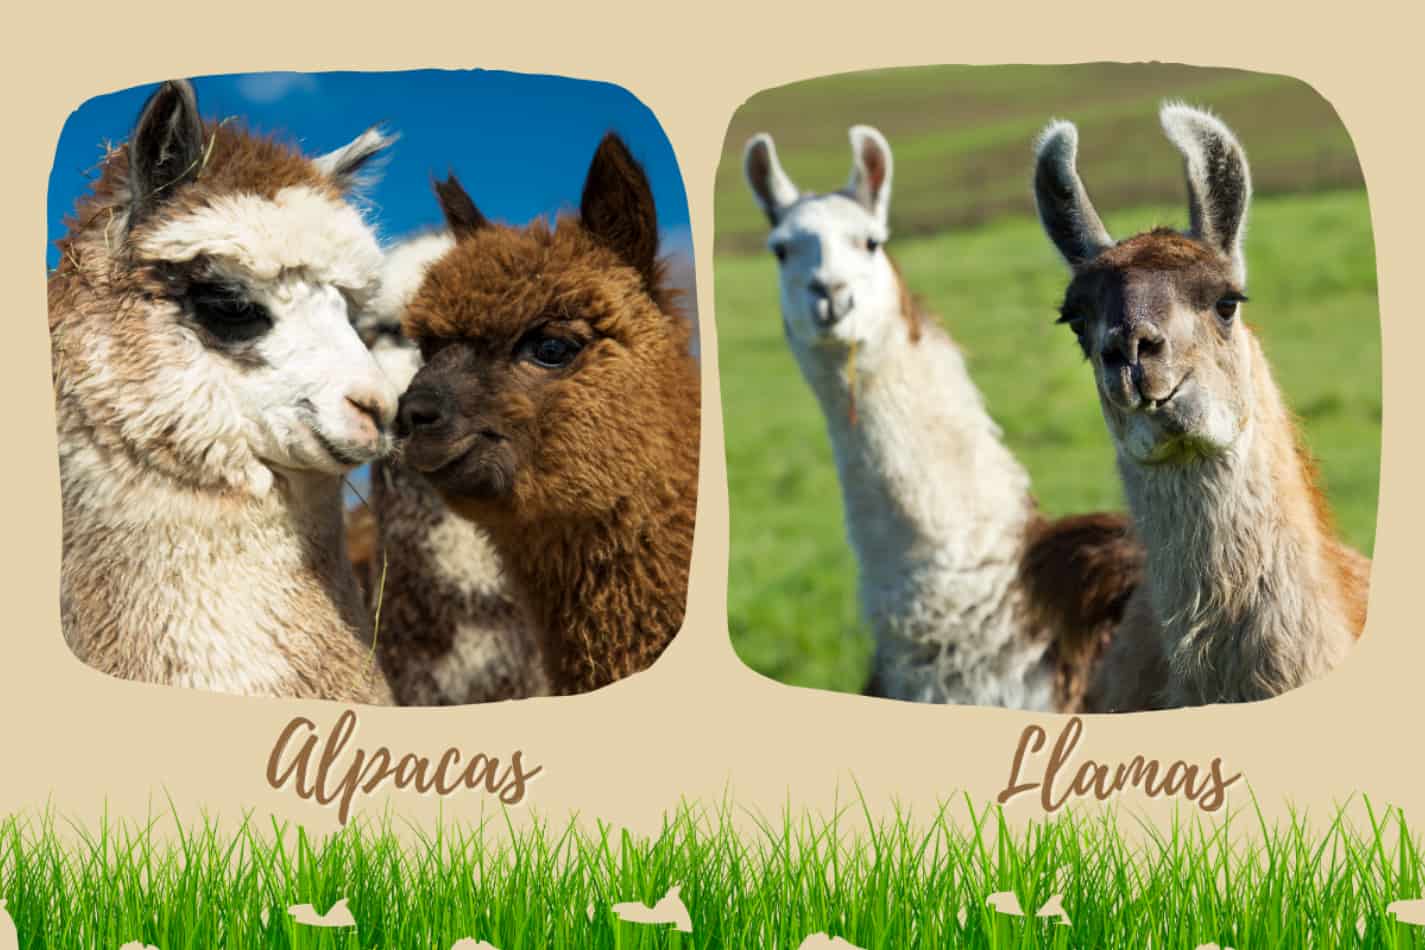 An Image of two llamas and two alpacas both at the farm.